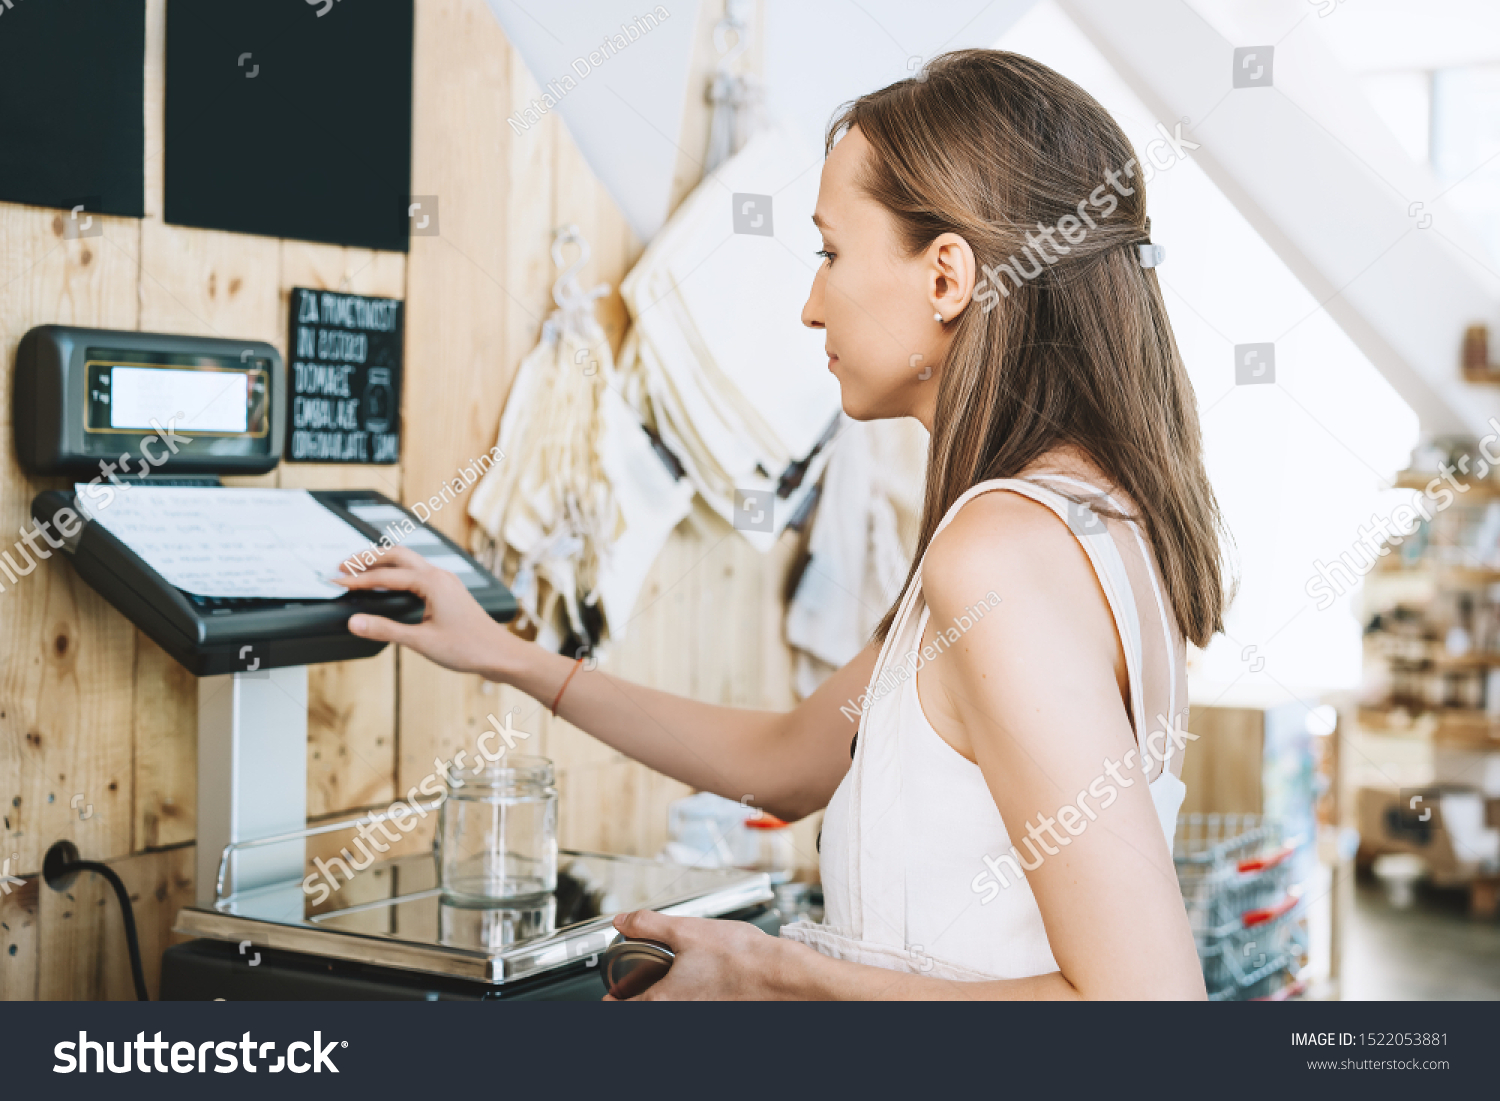 Woman chooses and buys products in zero waste shop. Weighing dry goods in plastic free grocery store. Girl with cotton reusable bag weigh glass jars on scales. Eco shopping at local business #1522053881